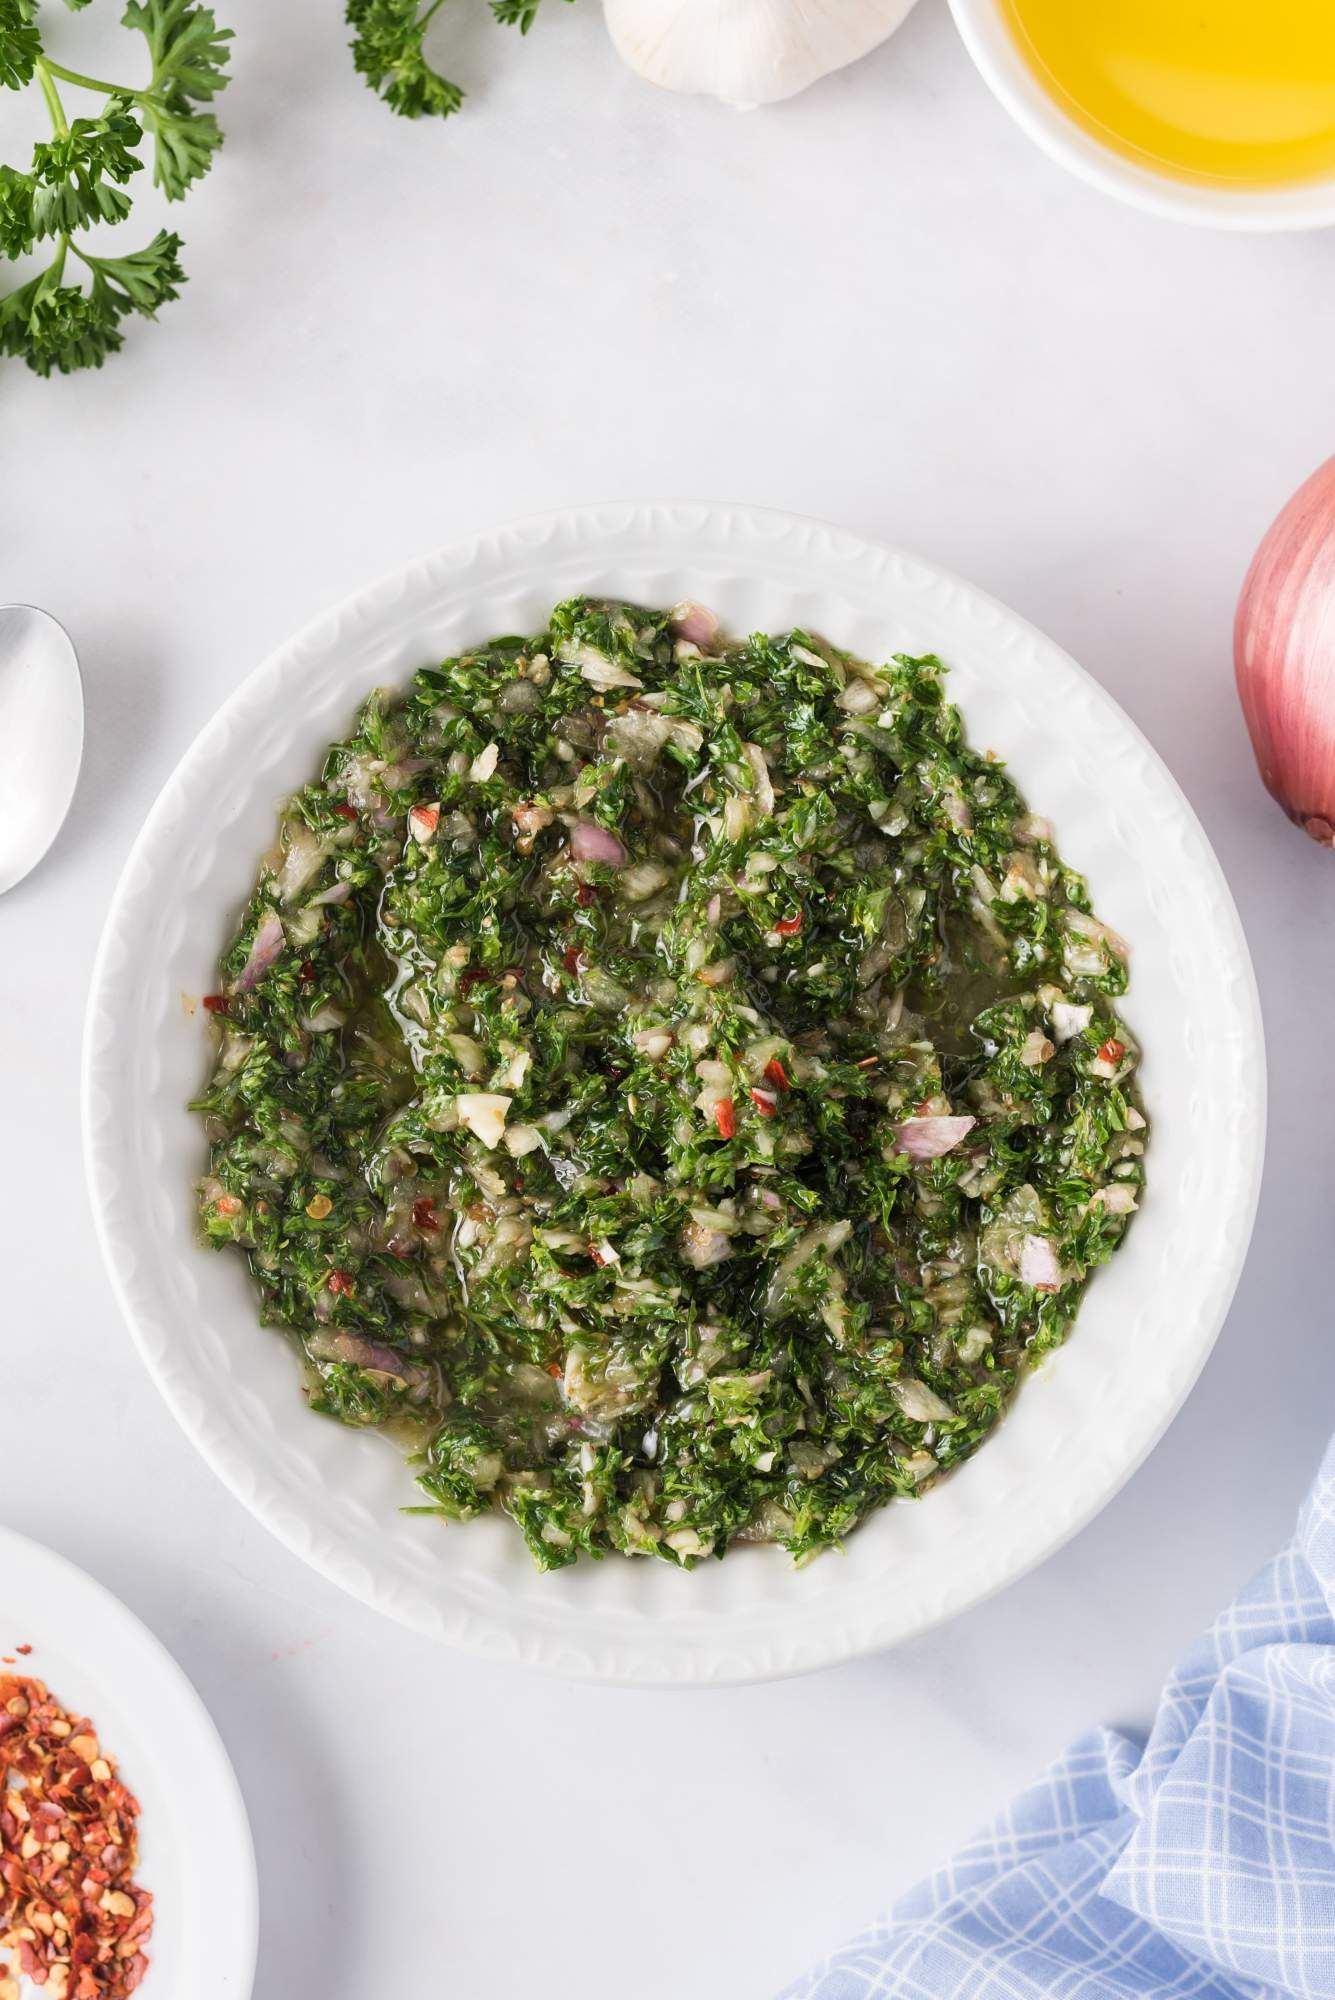 Chimichurri sauce served in a white bowl with parsley, shallots, and red pepper flakes on the side.